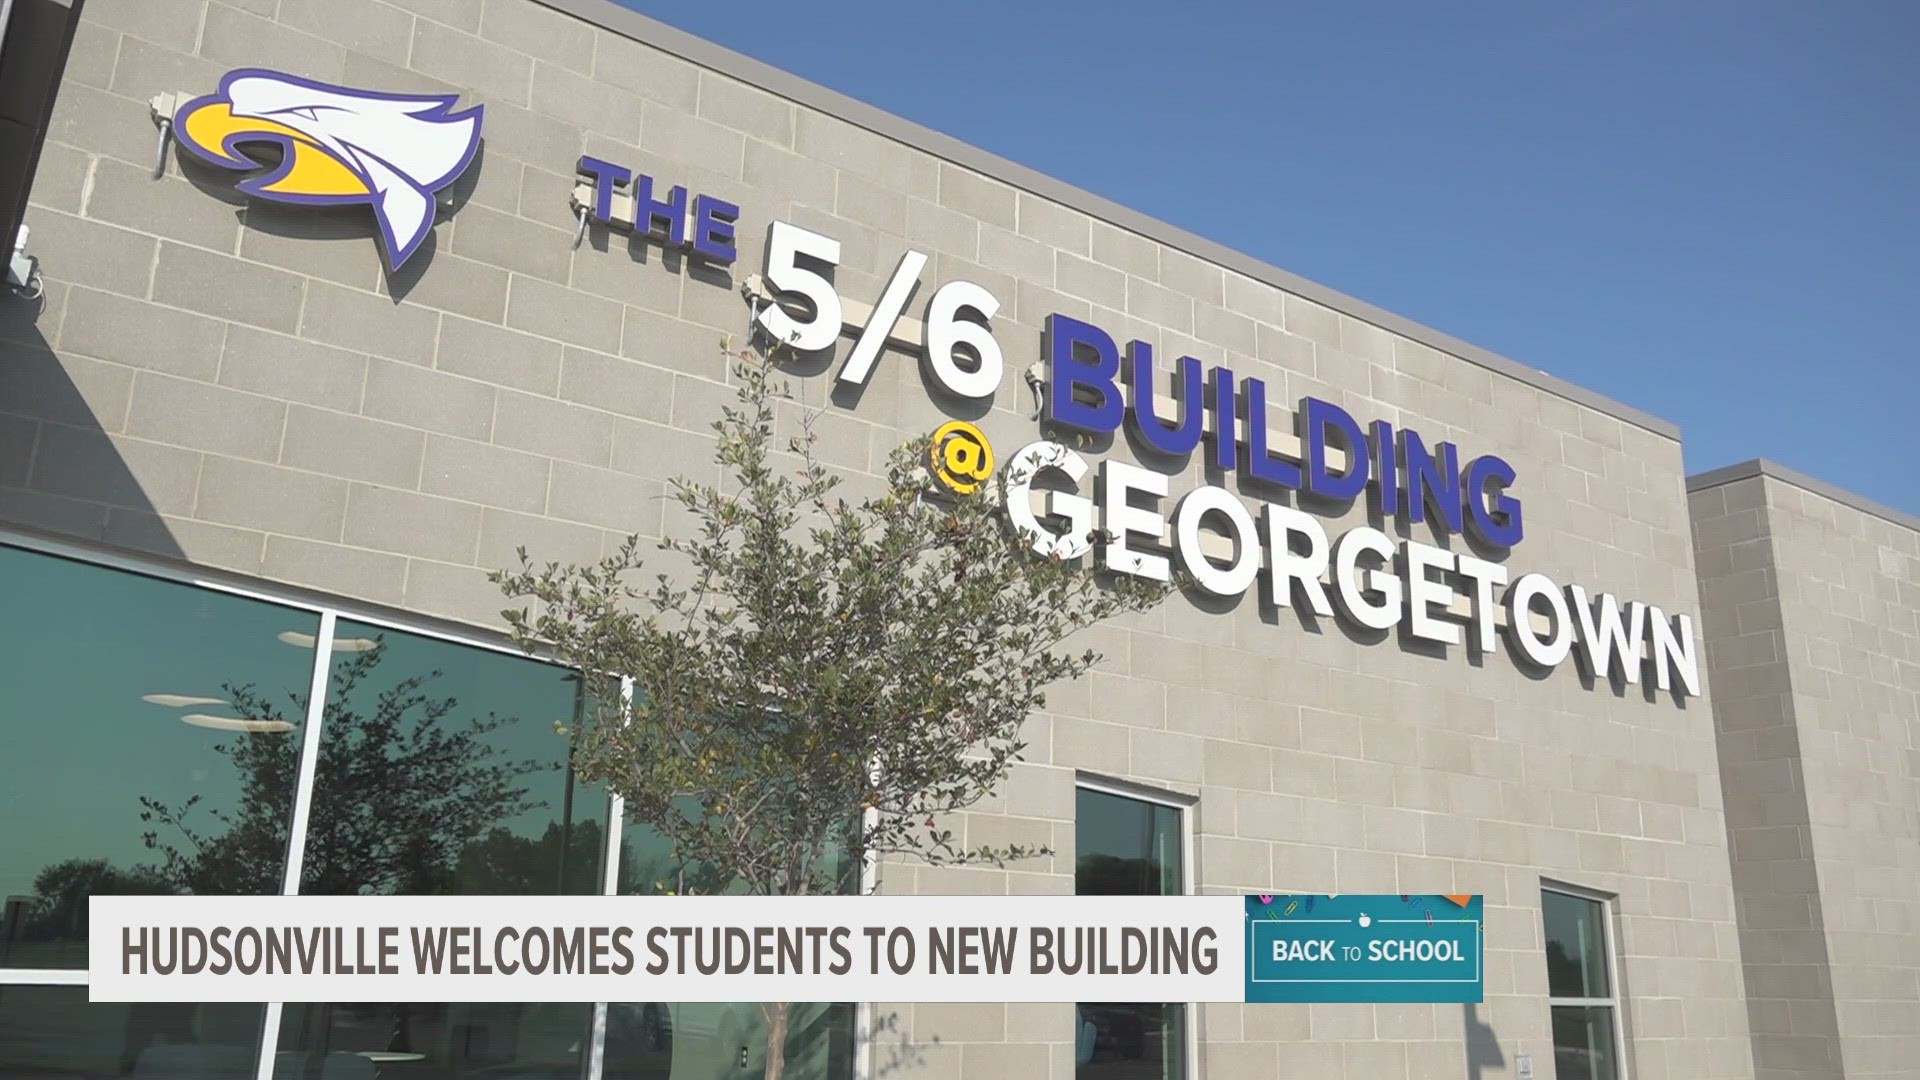 The new building will welcome over 600 fifth and sixth graders Monday morning.